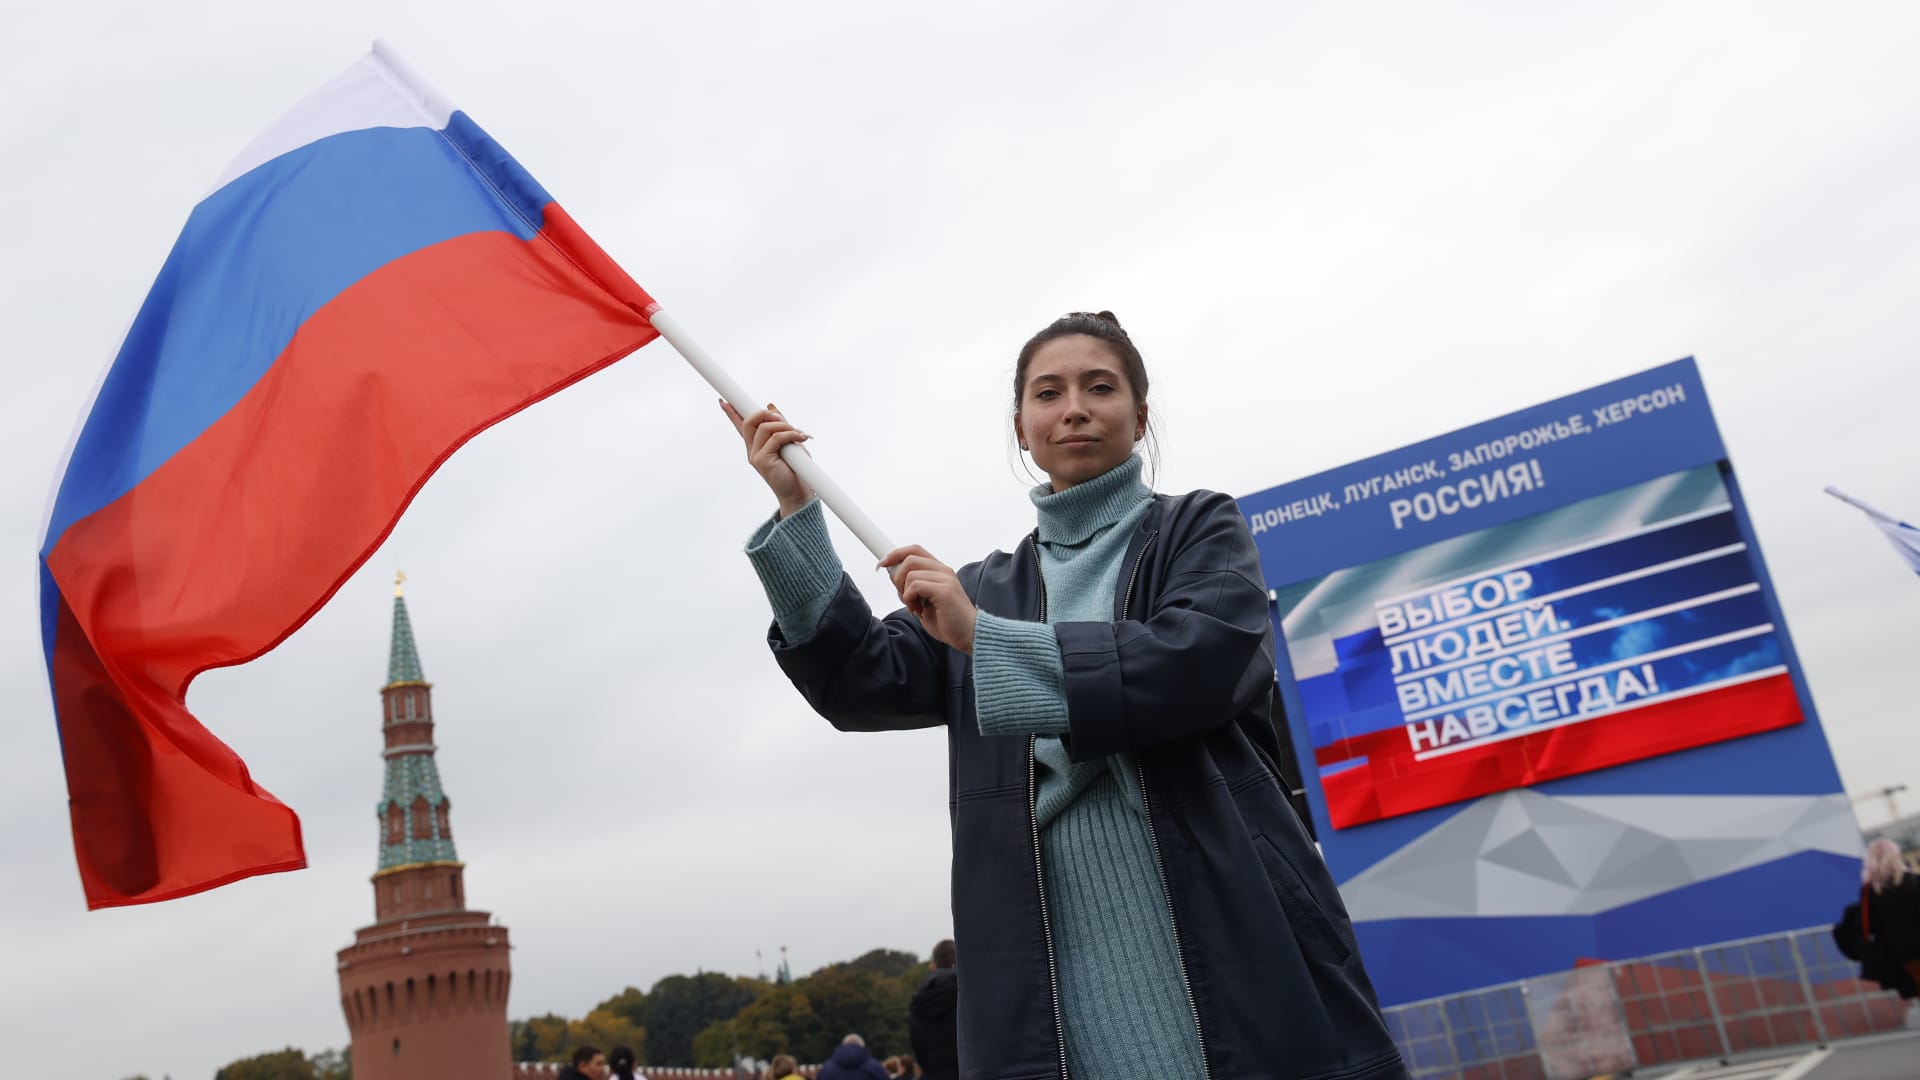 People holding Russian flags gather at Red Square during a ceremony marking the annexation of four regions of Ukraine after referendums on September 30, 2022, in Moscow, Russia.